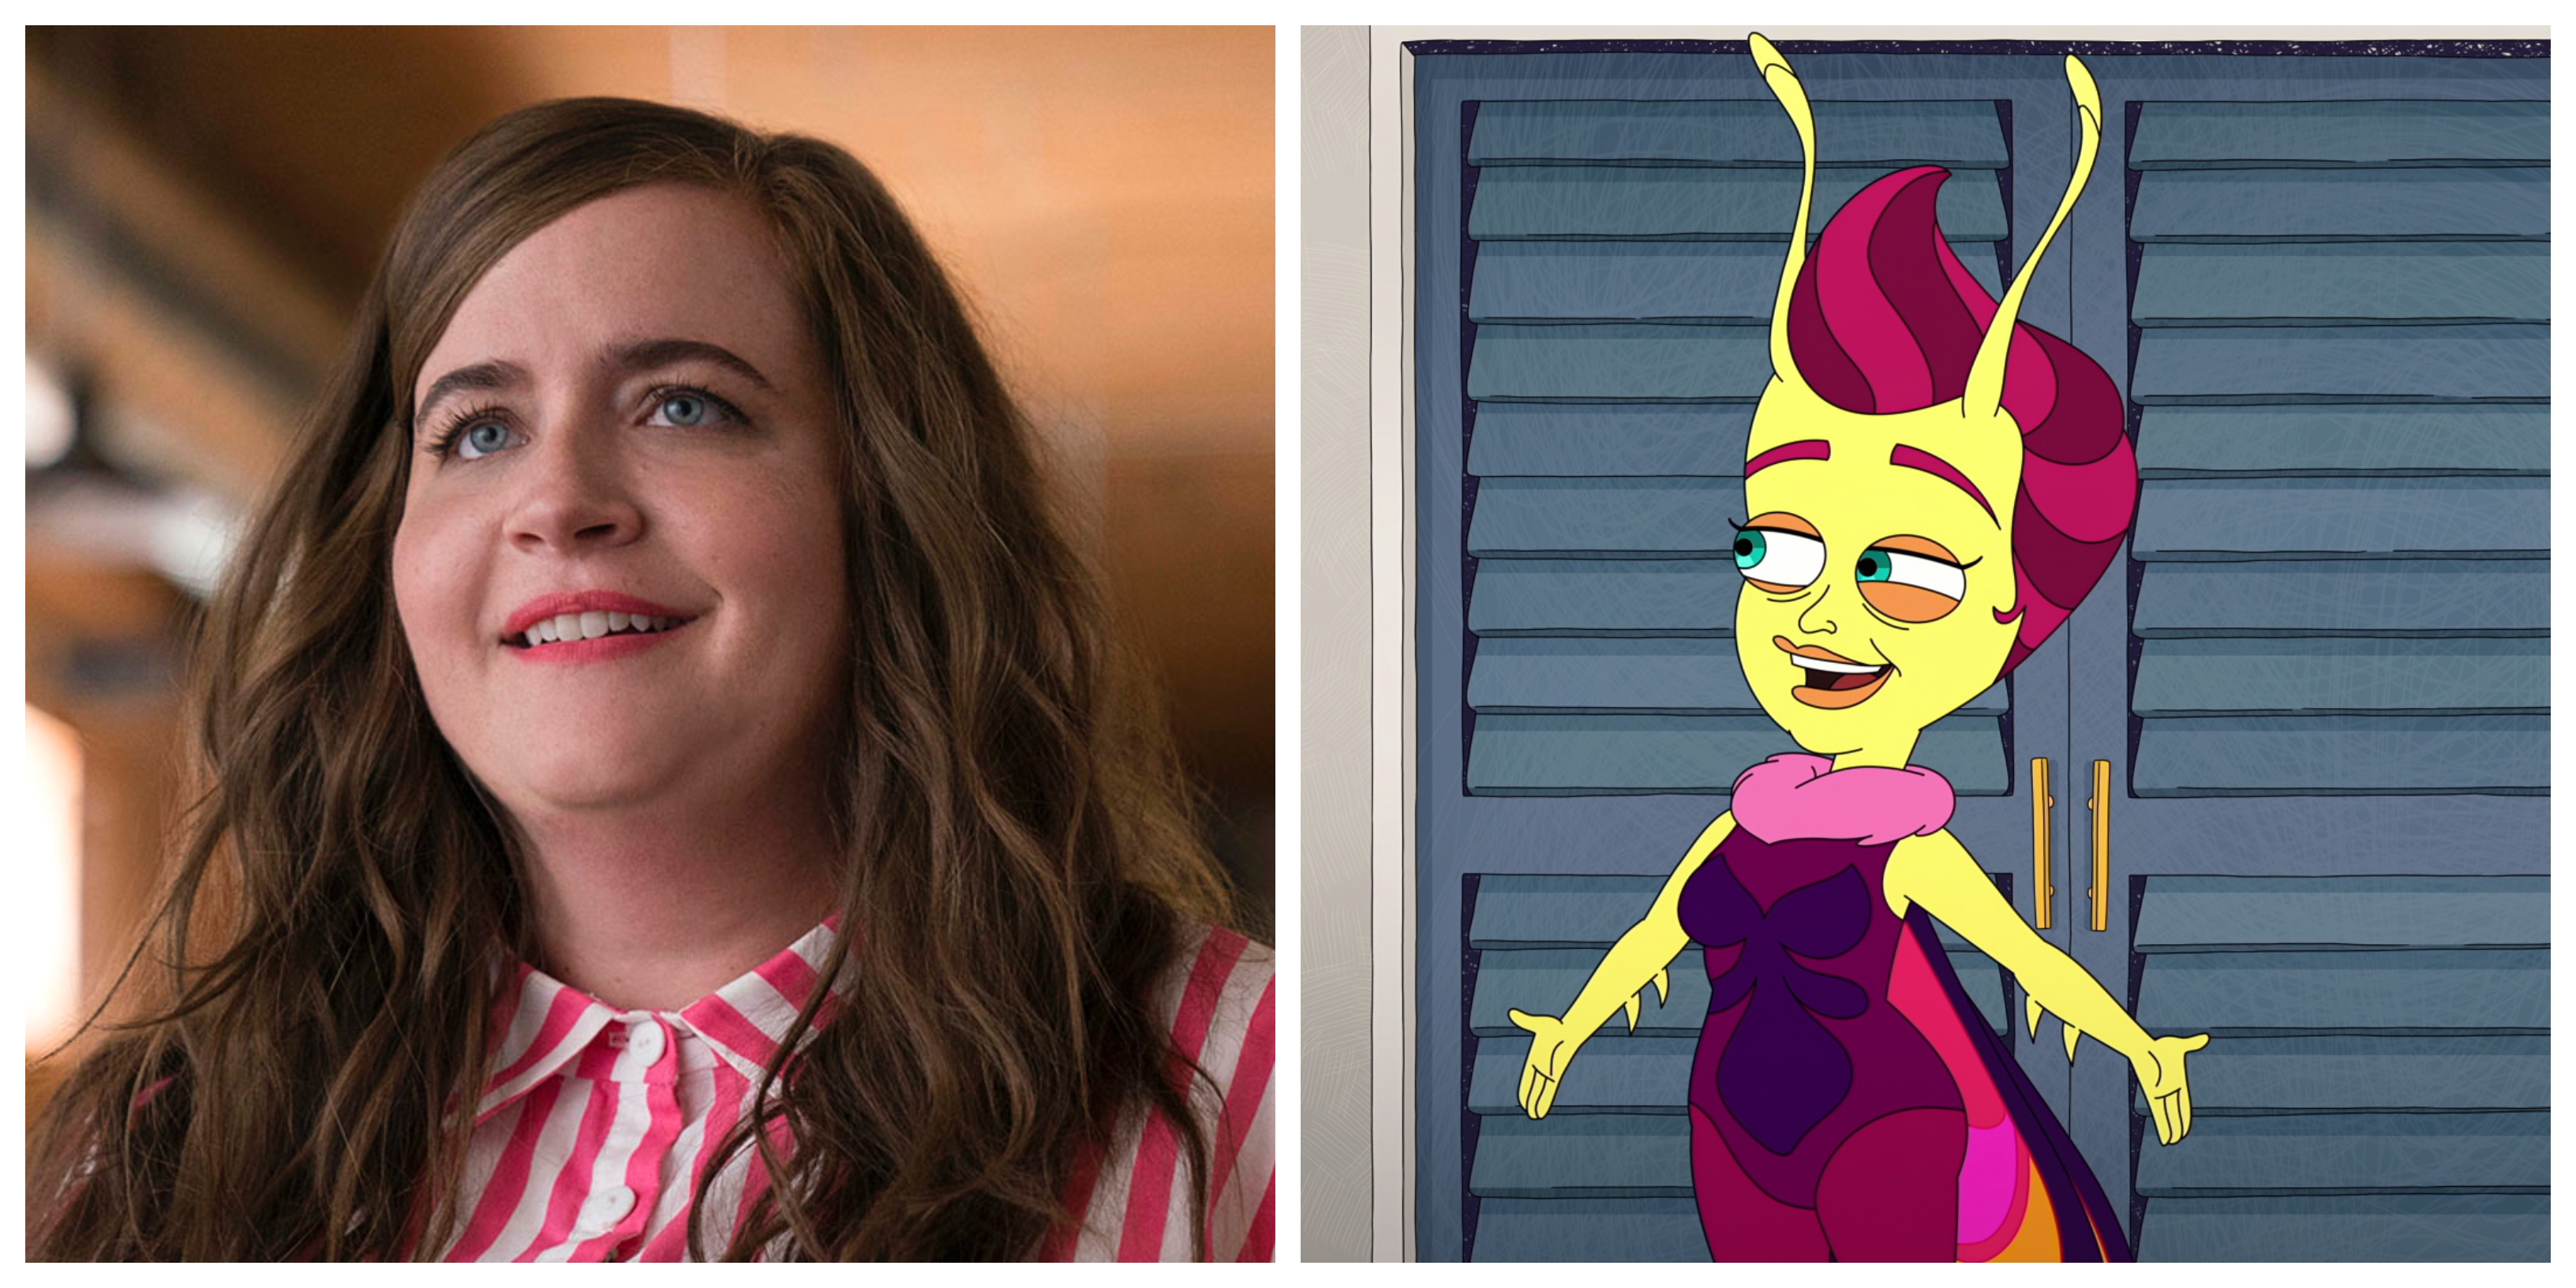 Human Resources Voice Cast - Aidy Bryant as Emmy 